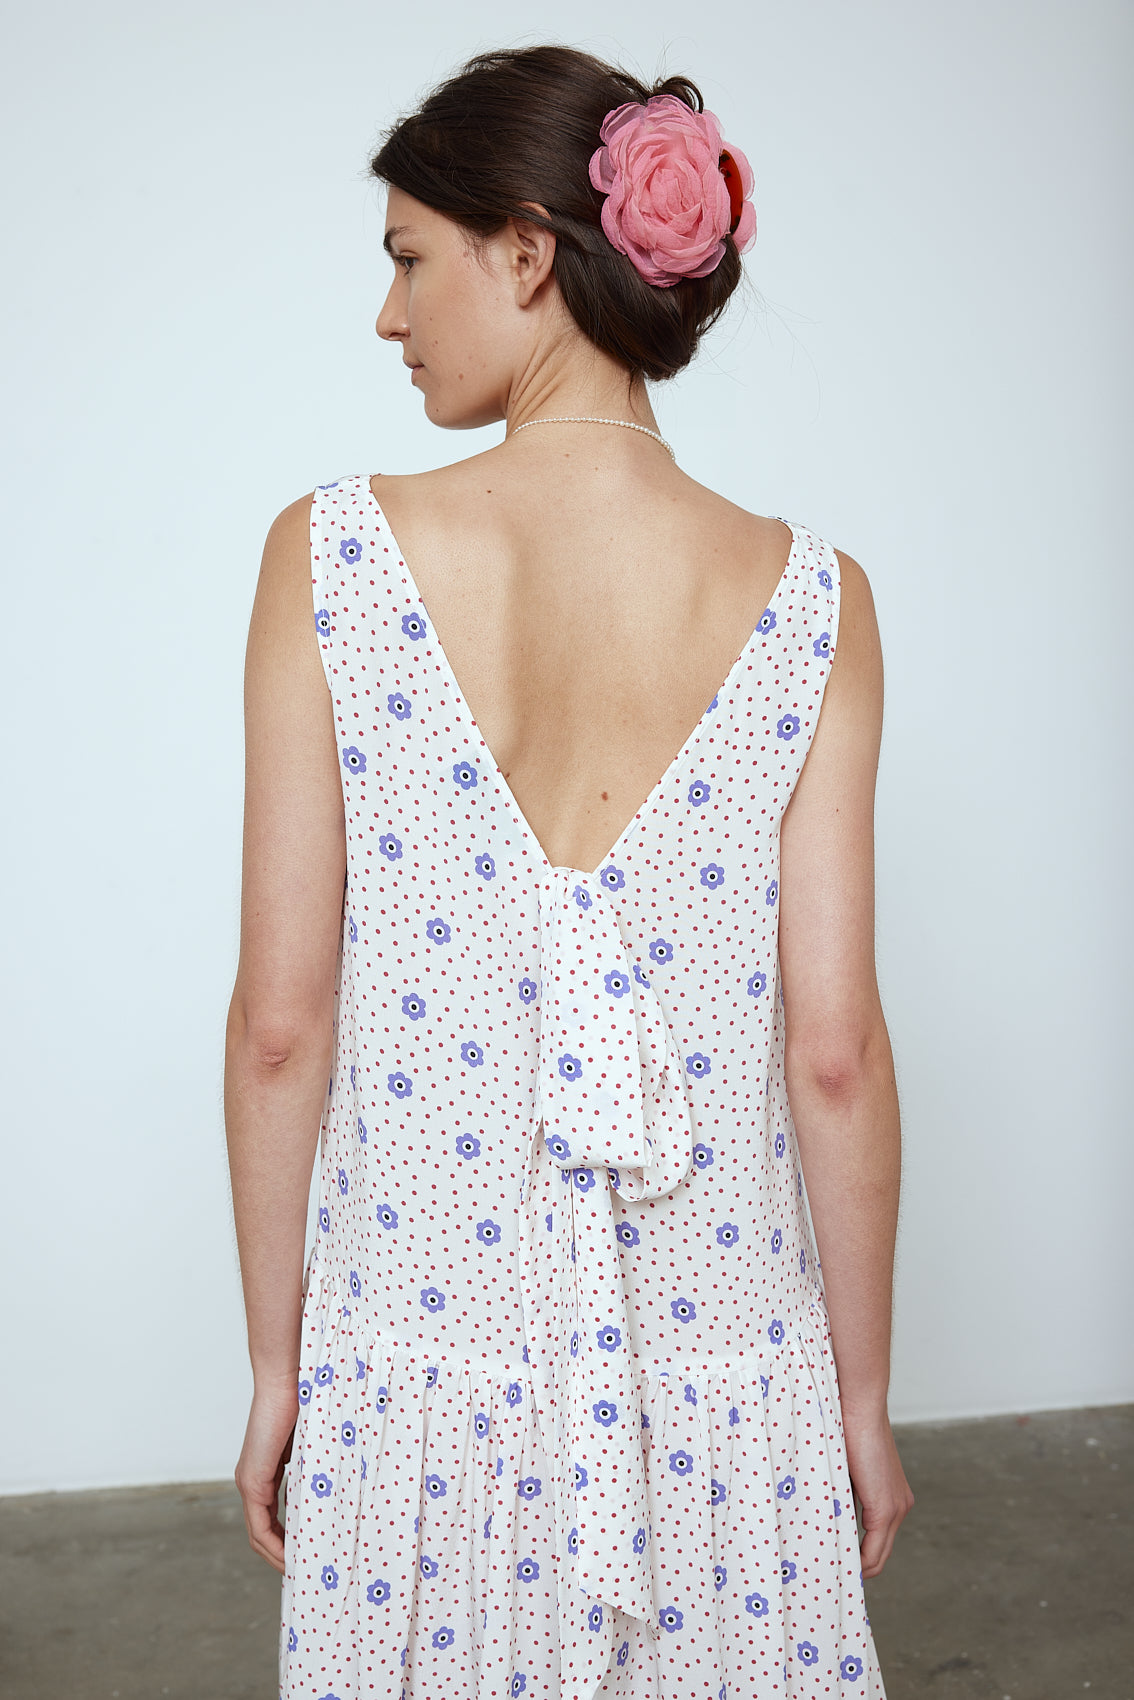 The Sonya Dress is an oversized style with a high neckline and low back featuring a large bow detail. The dress is made from soft mulberry silk featuring a White Daisy print. Style it with an open shirt or denim jacket.  Also available in Beaded Emerald Silk Velvet, Navy Flower Poplin, and Black Silk Velvet.  Material: 100% cotton.